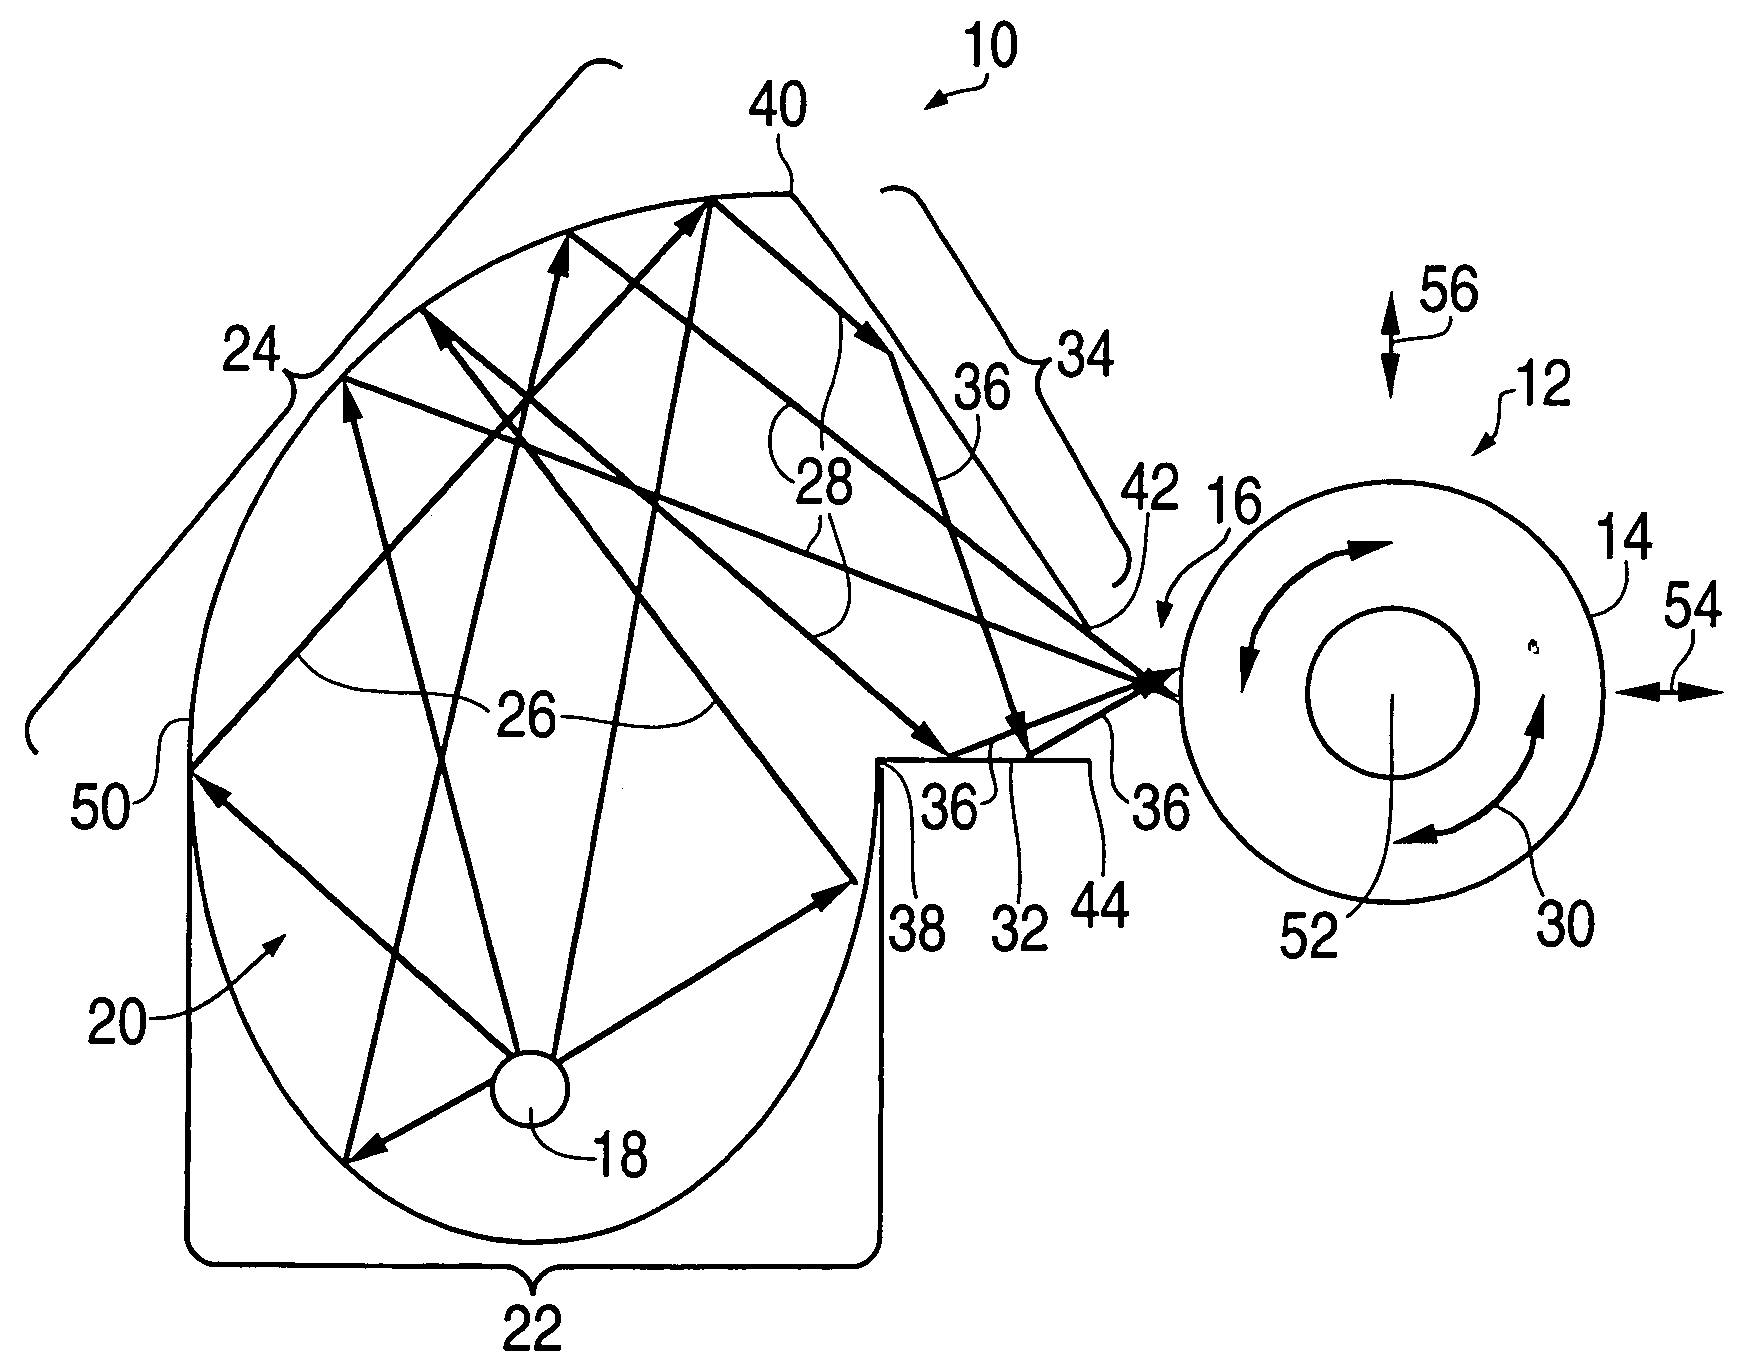 Apparatus and method for providing substantially uniform radiation of a three-dimensional object with at least one curved surface